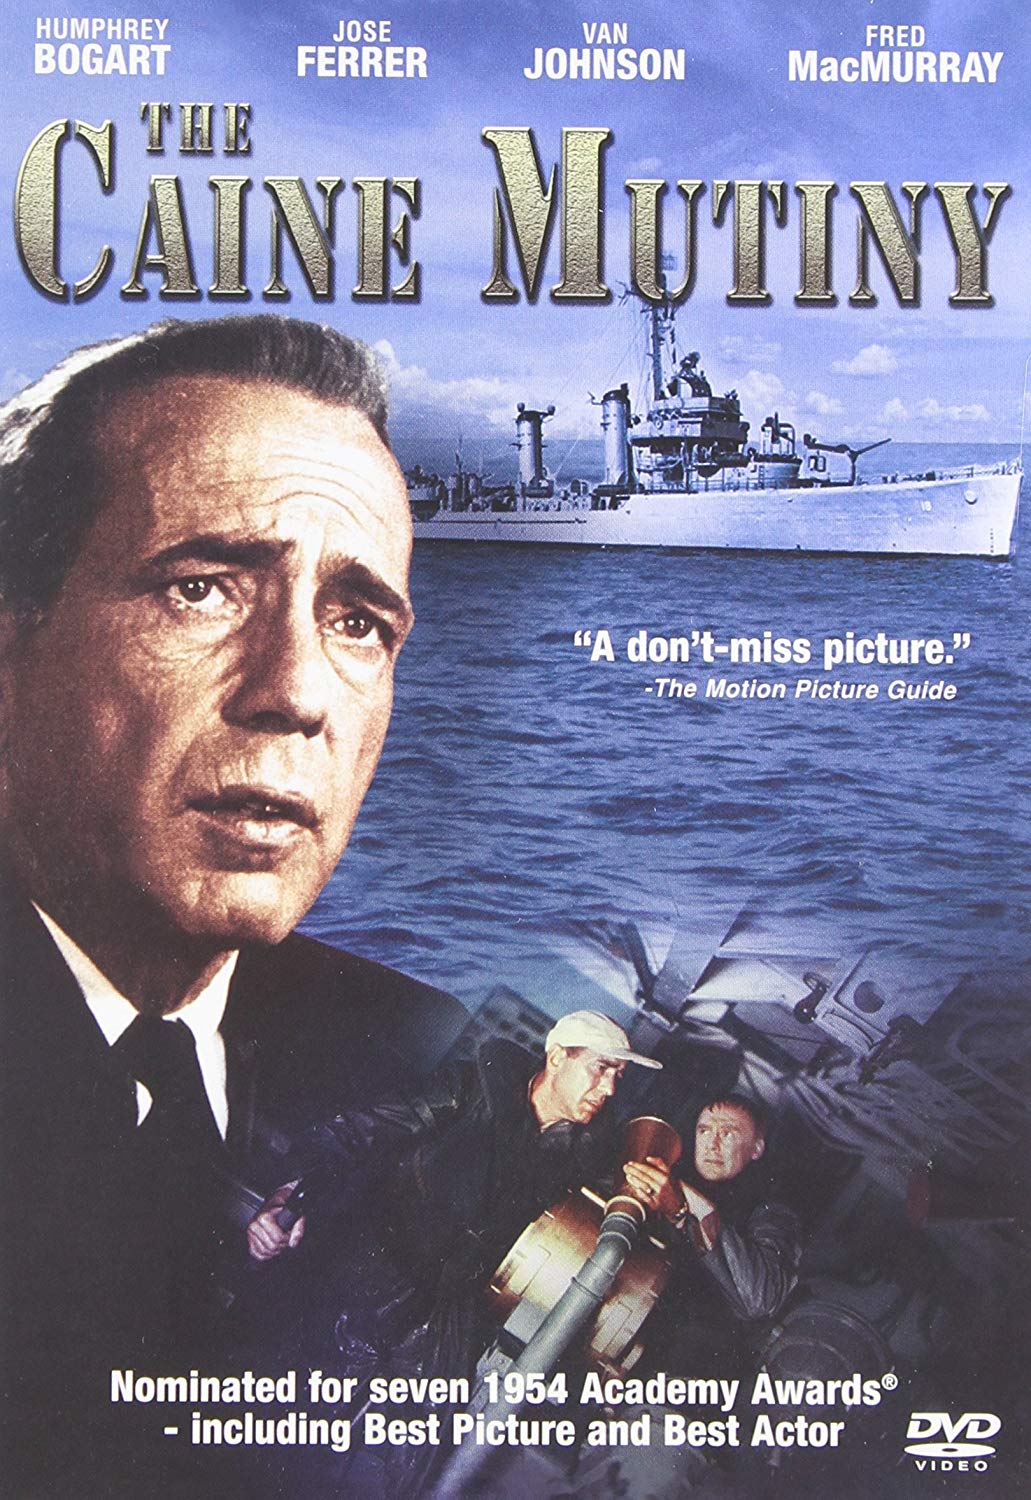  DVD:  The Caine Mutiny    Actors:   Humphrey Bogart ,  Jose Ferrer ,  Van Johnson ,  Fred MacMurray ,  Robert Francis    Directors:   Edward Dmytryk    Producers:   Stanley Kramer    Format:  Anamorphic, Closed-captioned, Color, Full Screen, NTSC, S